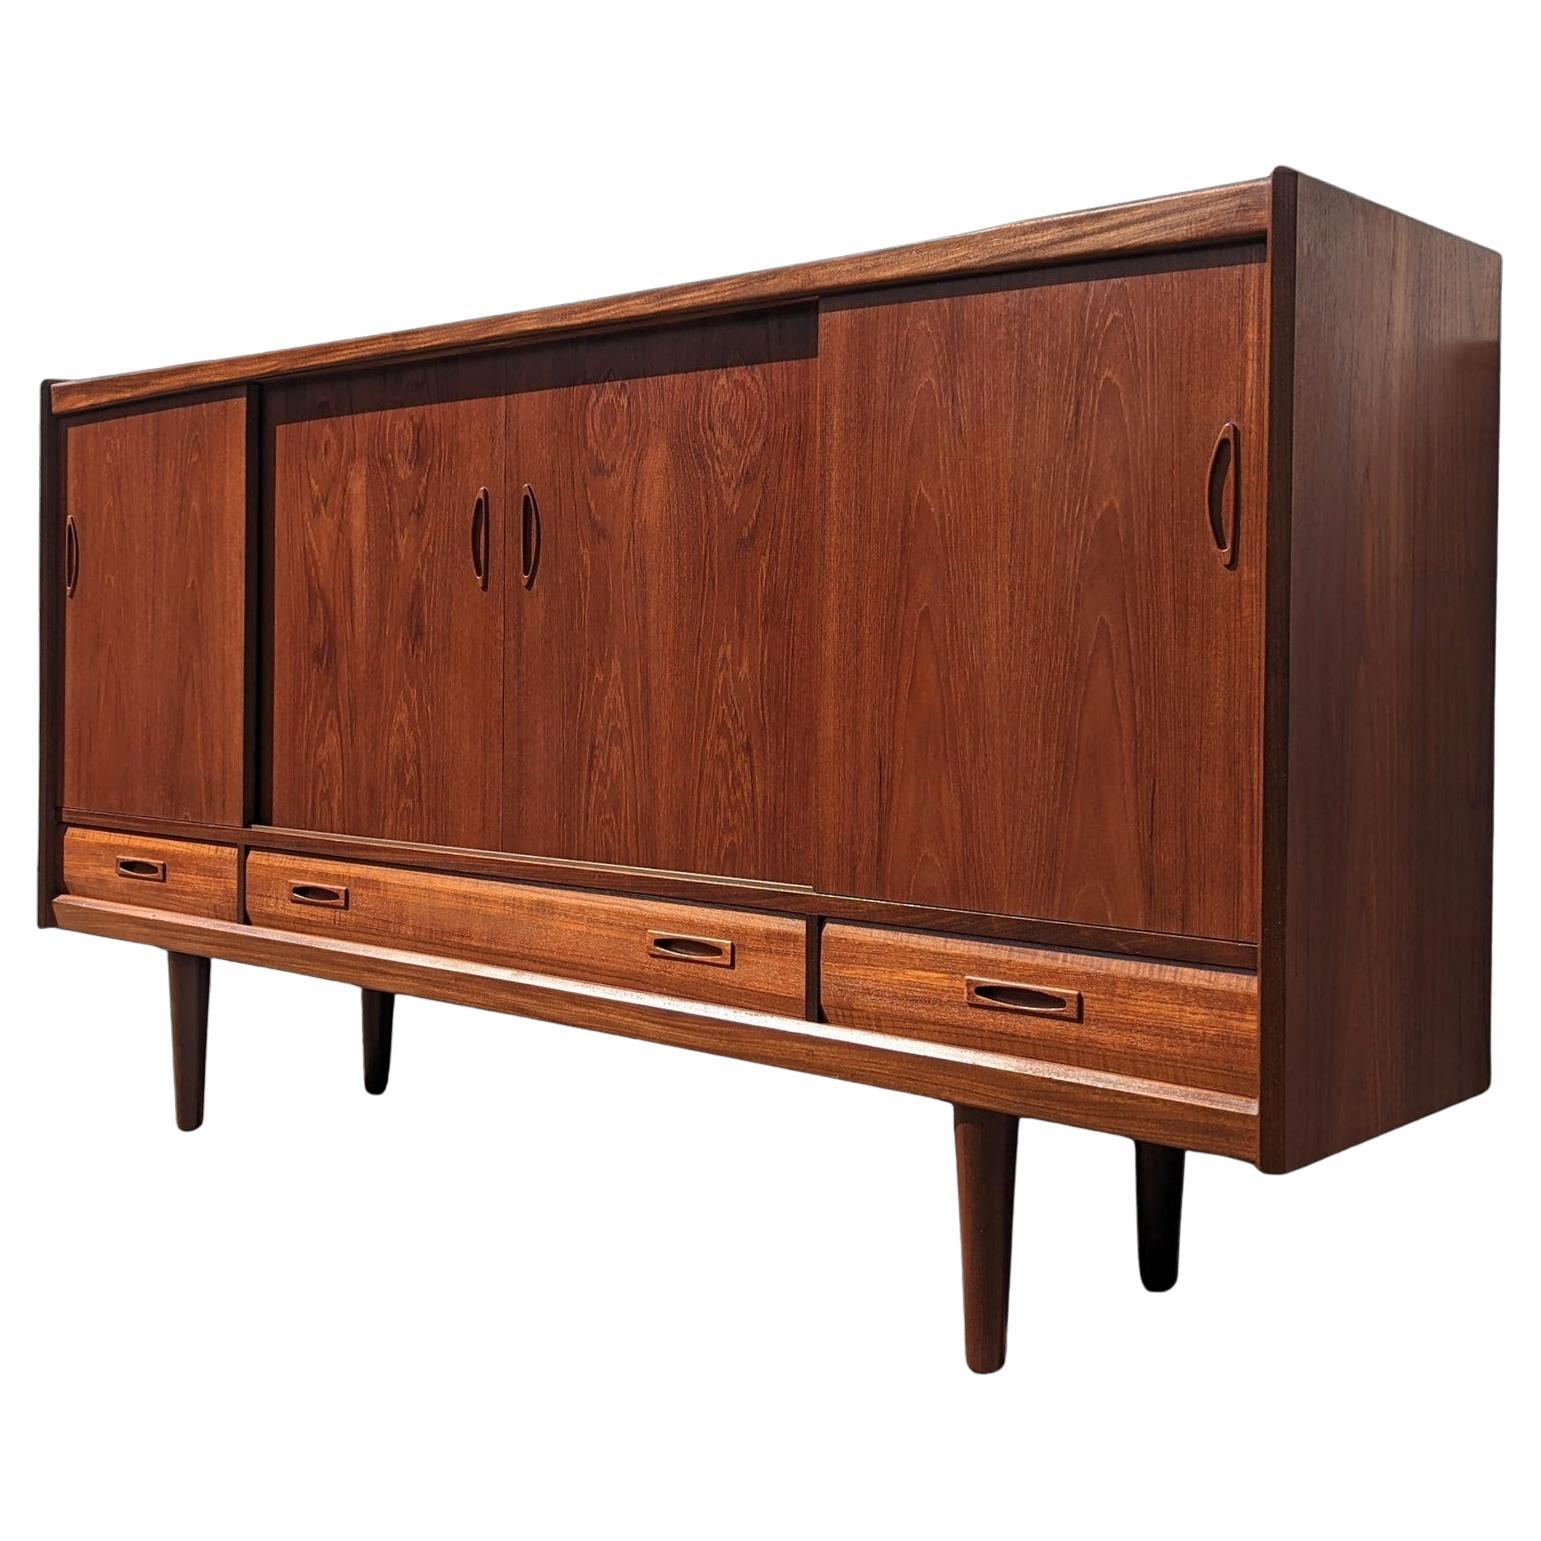 Mid Century Danish Modern Teak Cocktail Highboard

Above average vintage condition and structurally sound. Has some expected slight finish wear and scratching. Beautifully crafted. Outdoor listing pictures might appear slightly darker or more red